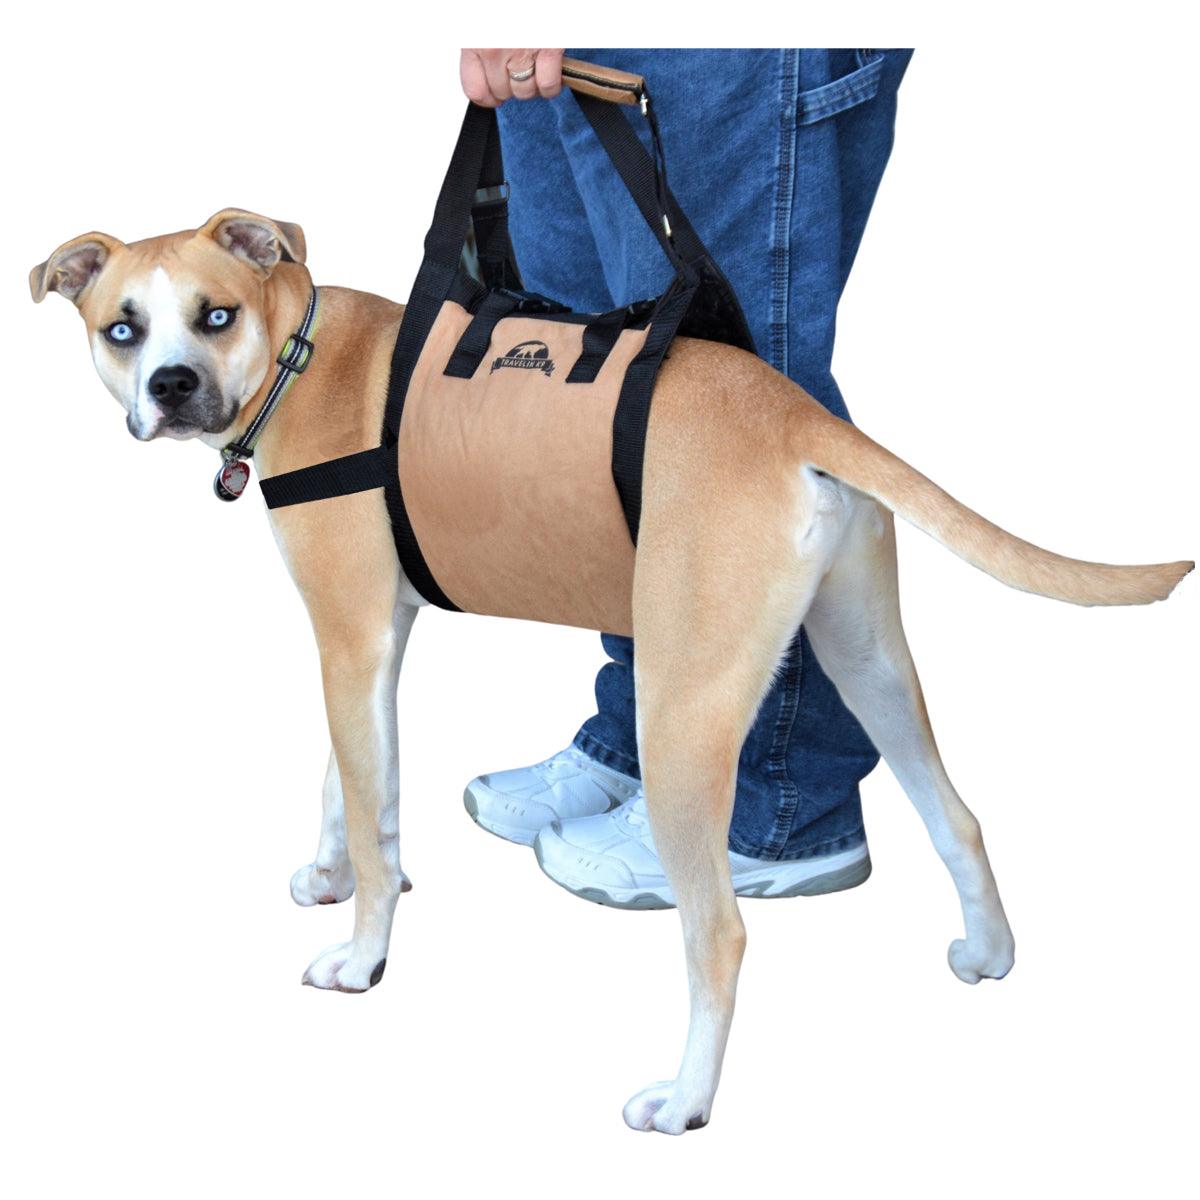 Dog wearing Dog Lift support sling for large dogs